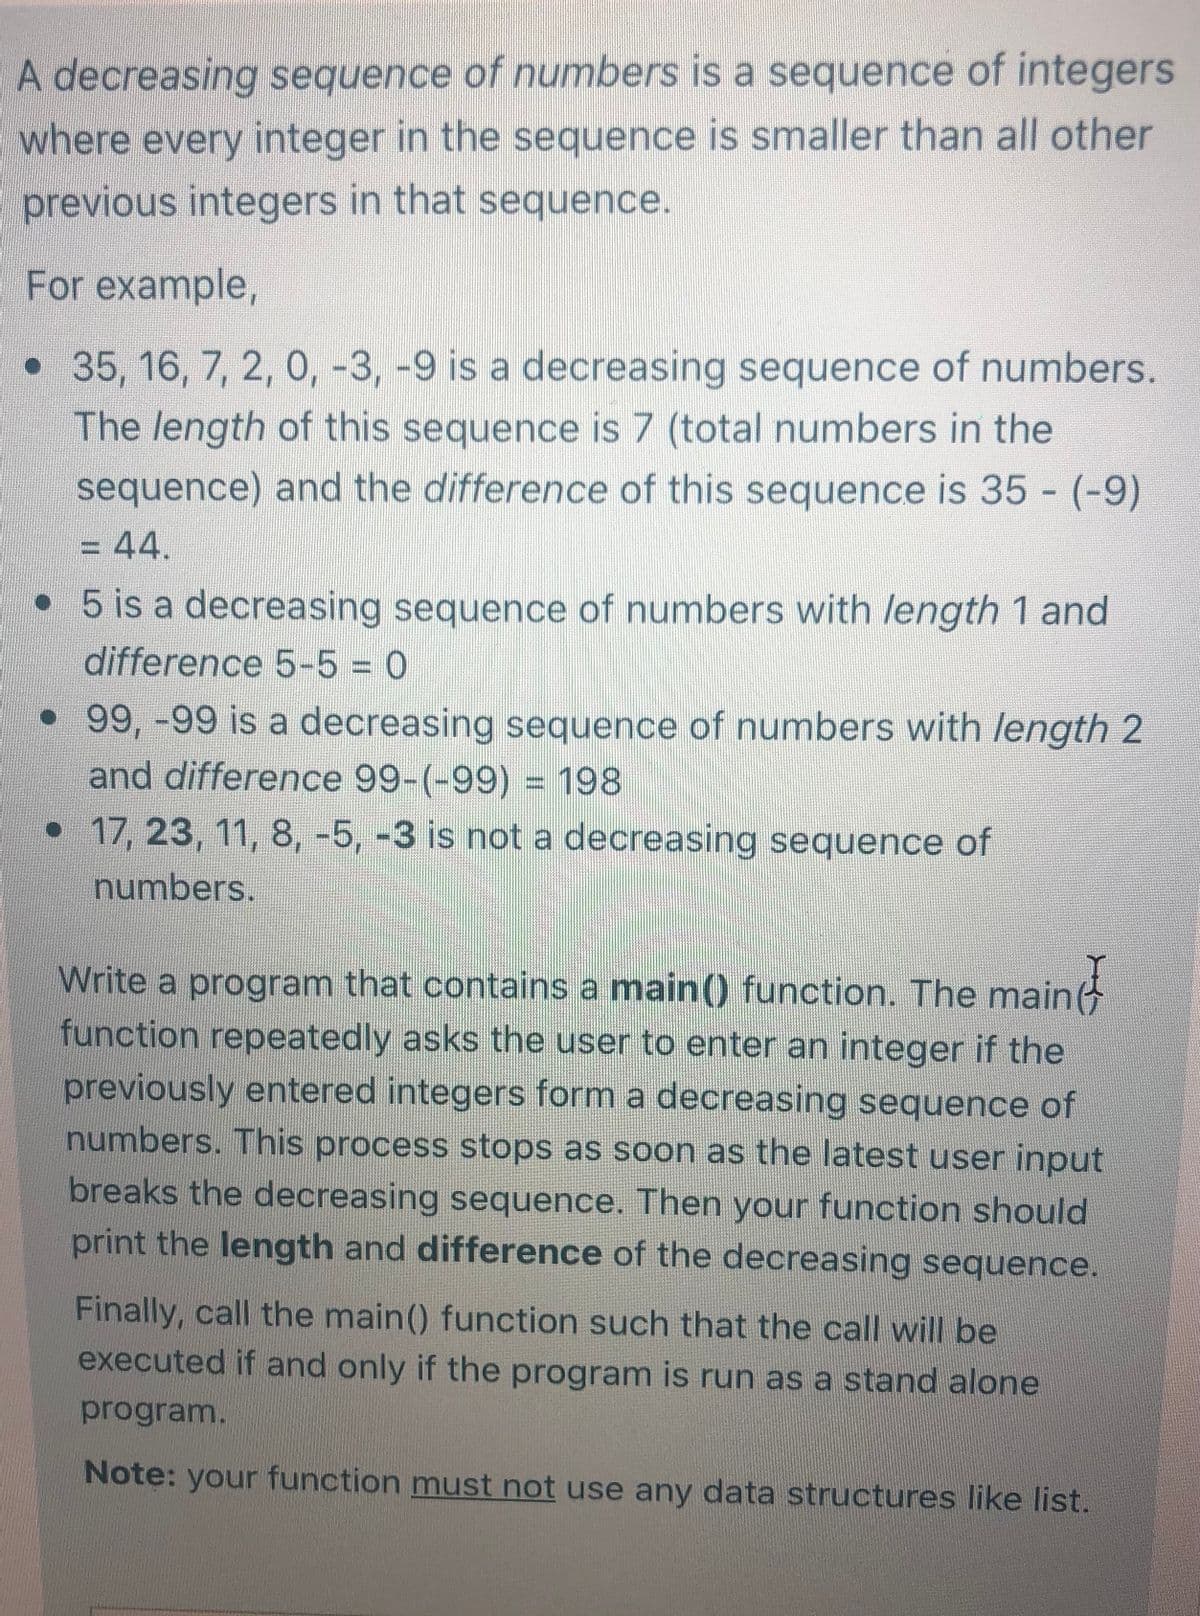 A decreasing sequence of numbers is a sequence of integers
where every integer in the sequence is smaller than all other
previous integers in that sequence.
For example,
•35, 16, 7, 2, 0, -3, -9 is a decreasing sequence of numbers.
The length of this sequence is 7 (total numbers in the
sequence) and the difference of this sequence is 35 - (-9)
-44.
• 5 is a decreasing sequence of numbers with length 1 and
difference 5-5 = 0
•99,-99 is a decreasing sequence of numbers with length 2
and difference 99-(-99) = 198
•17, 23, 11, 8, -5, -3 is not a decreasing sequence of
%3D
numbers.
Write a program that contains a main() function. The main
function repeatedly asks the user to enter an integer if the
previously entered integers form a decreasing sequence of
numbers. This process stops as soon as the latest user input
breaks the decreasing sequence. Then your function should
print the length and difference of the decreasing sequence.
Finally, call the main() function such that the call will be
executed if and only if the program is run as a stand alone
program.
Note: your function must not use any data structures like list.
